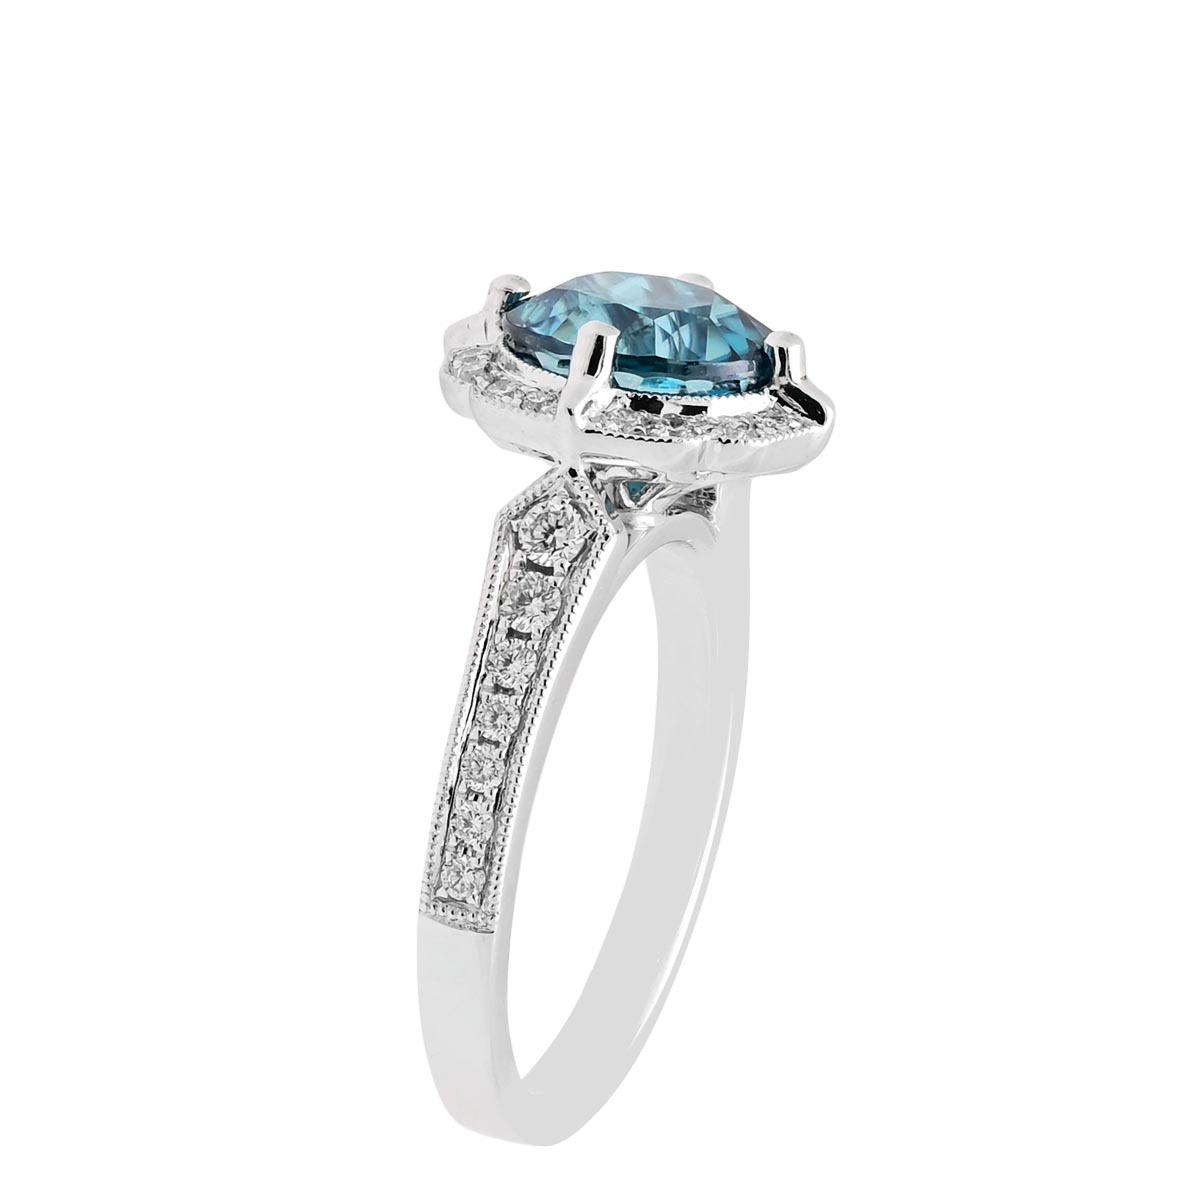 Oval Blue Zircon Ring in 14kt White Gold with Diamonds (1/3ct tw)